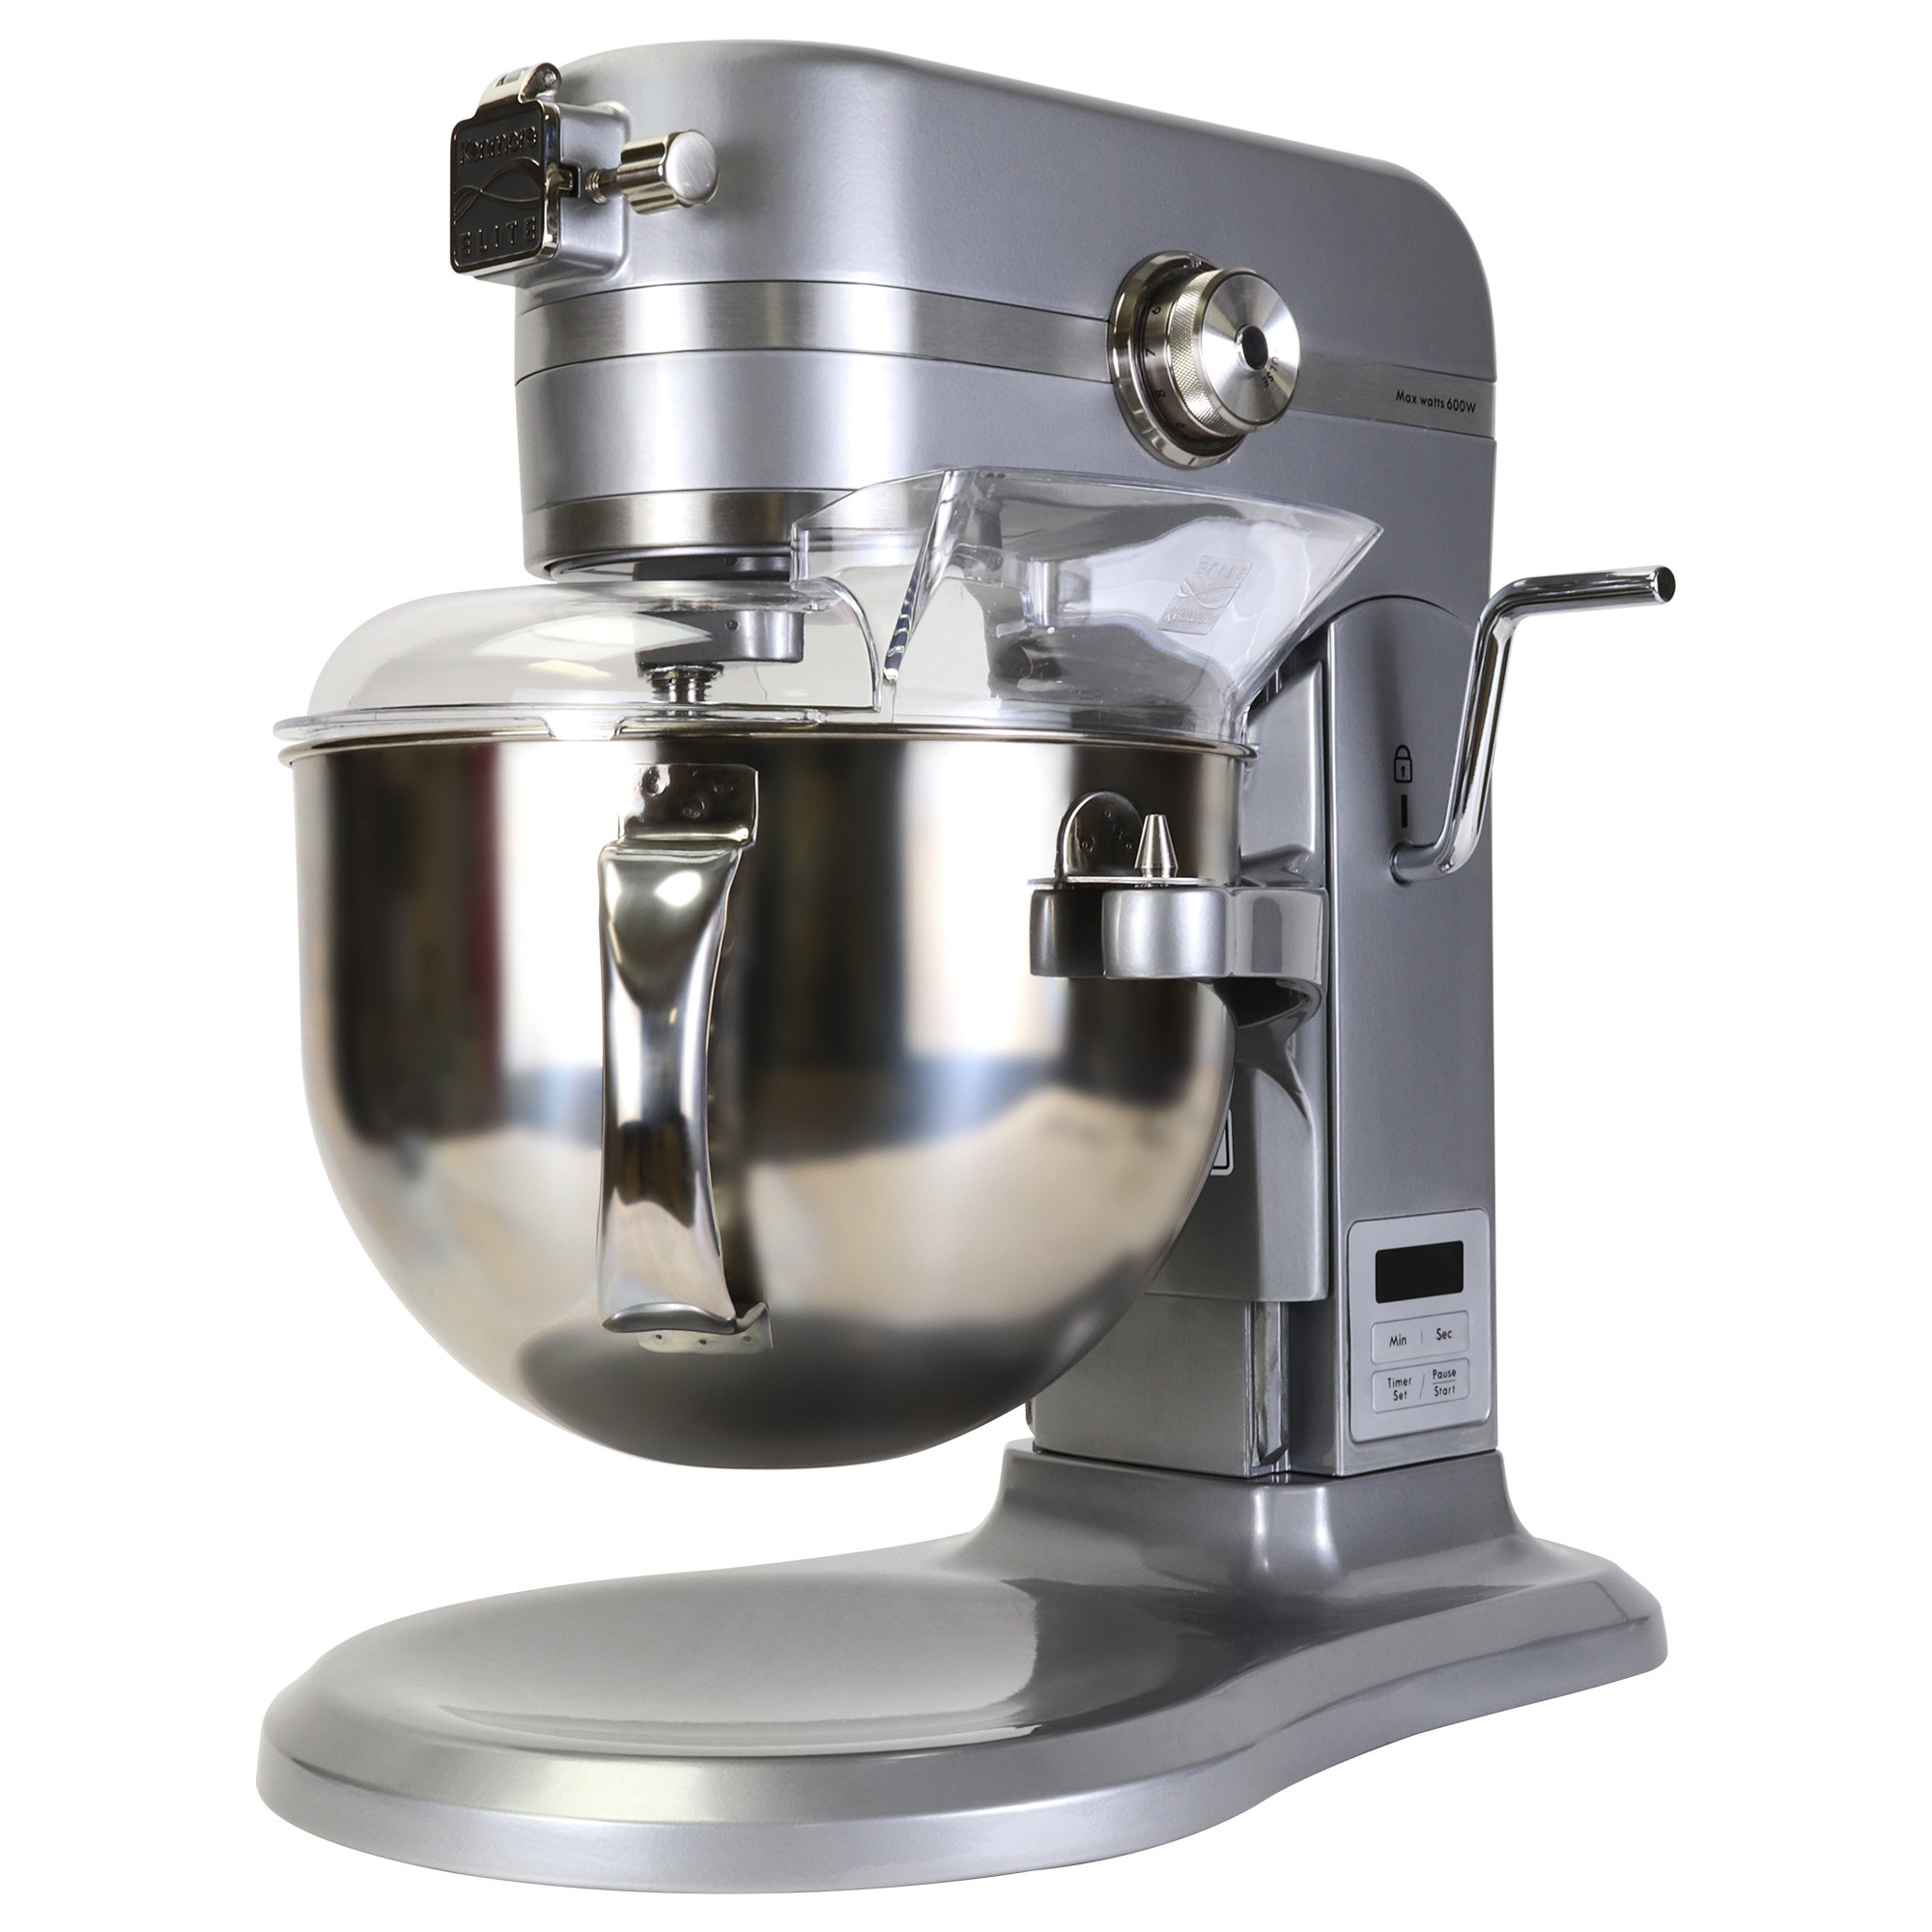 Kenmore Elite Heavy-Duty 6 Qt Bowl-Lift Stand Mixer 600W, with